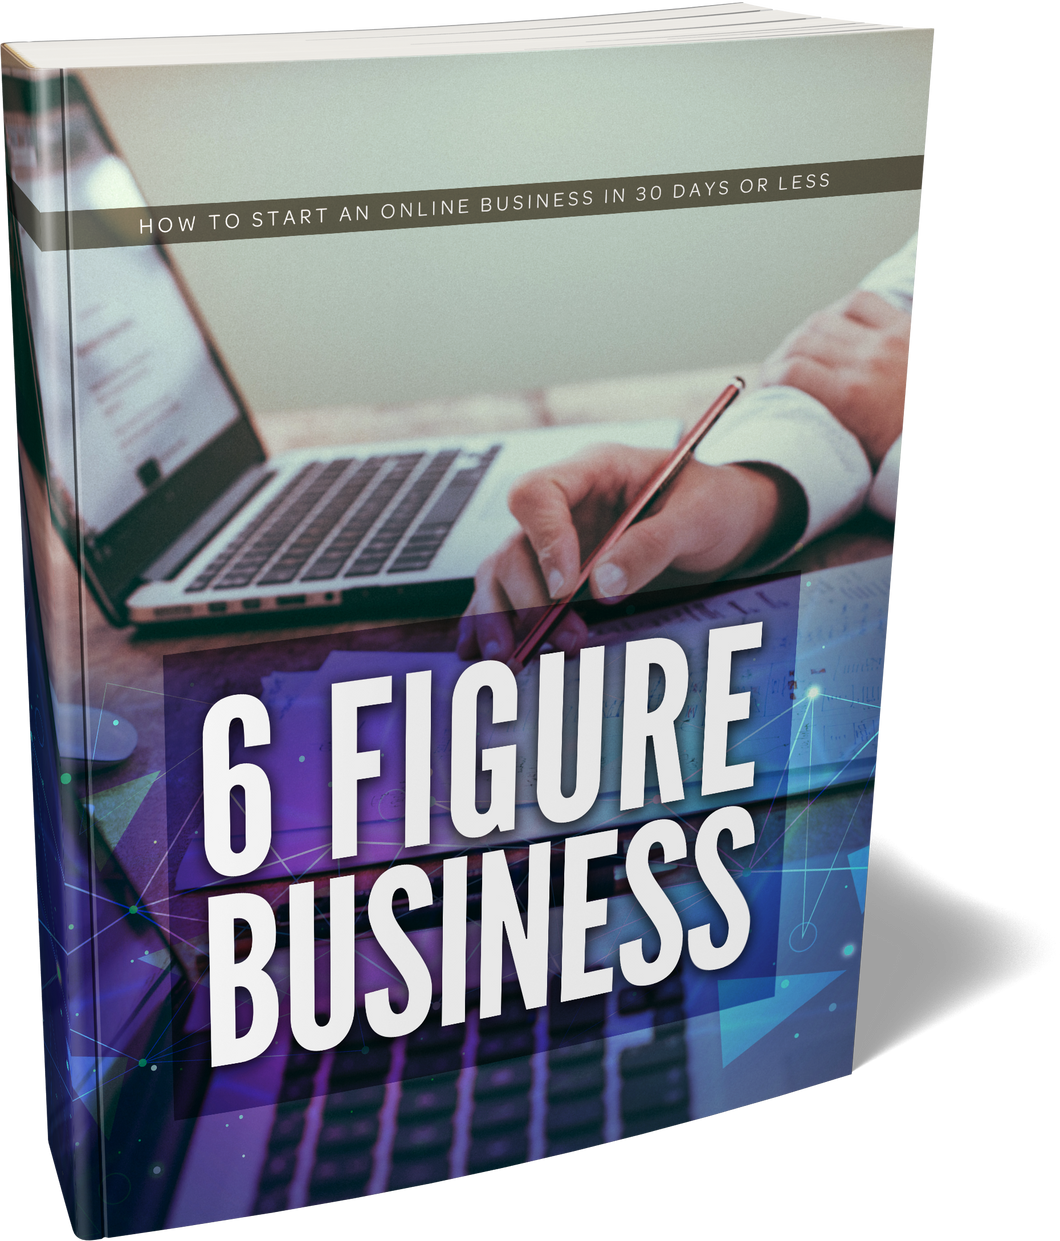 Starting Your 6 Figure Business